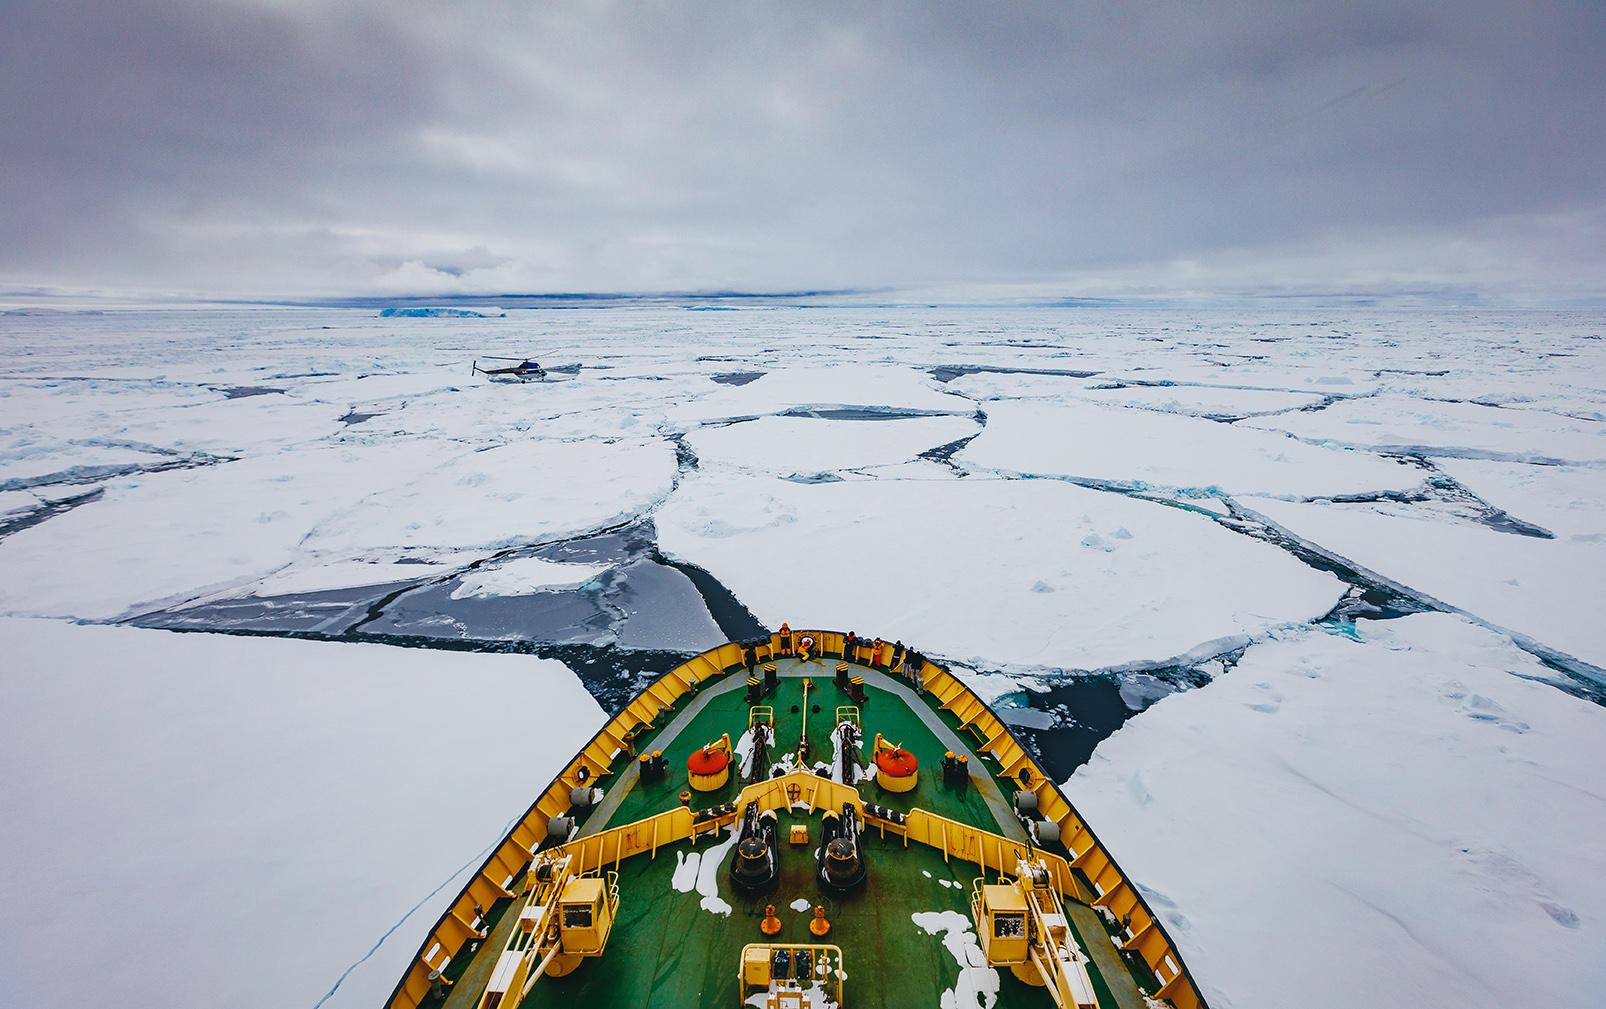  Quark Expeditions guests travel to Snow Hill Island on the legendary ice-breaker Kapitan Khlebnikov.